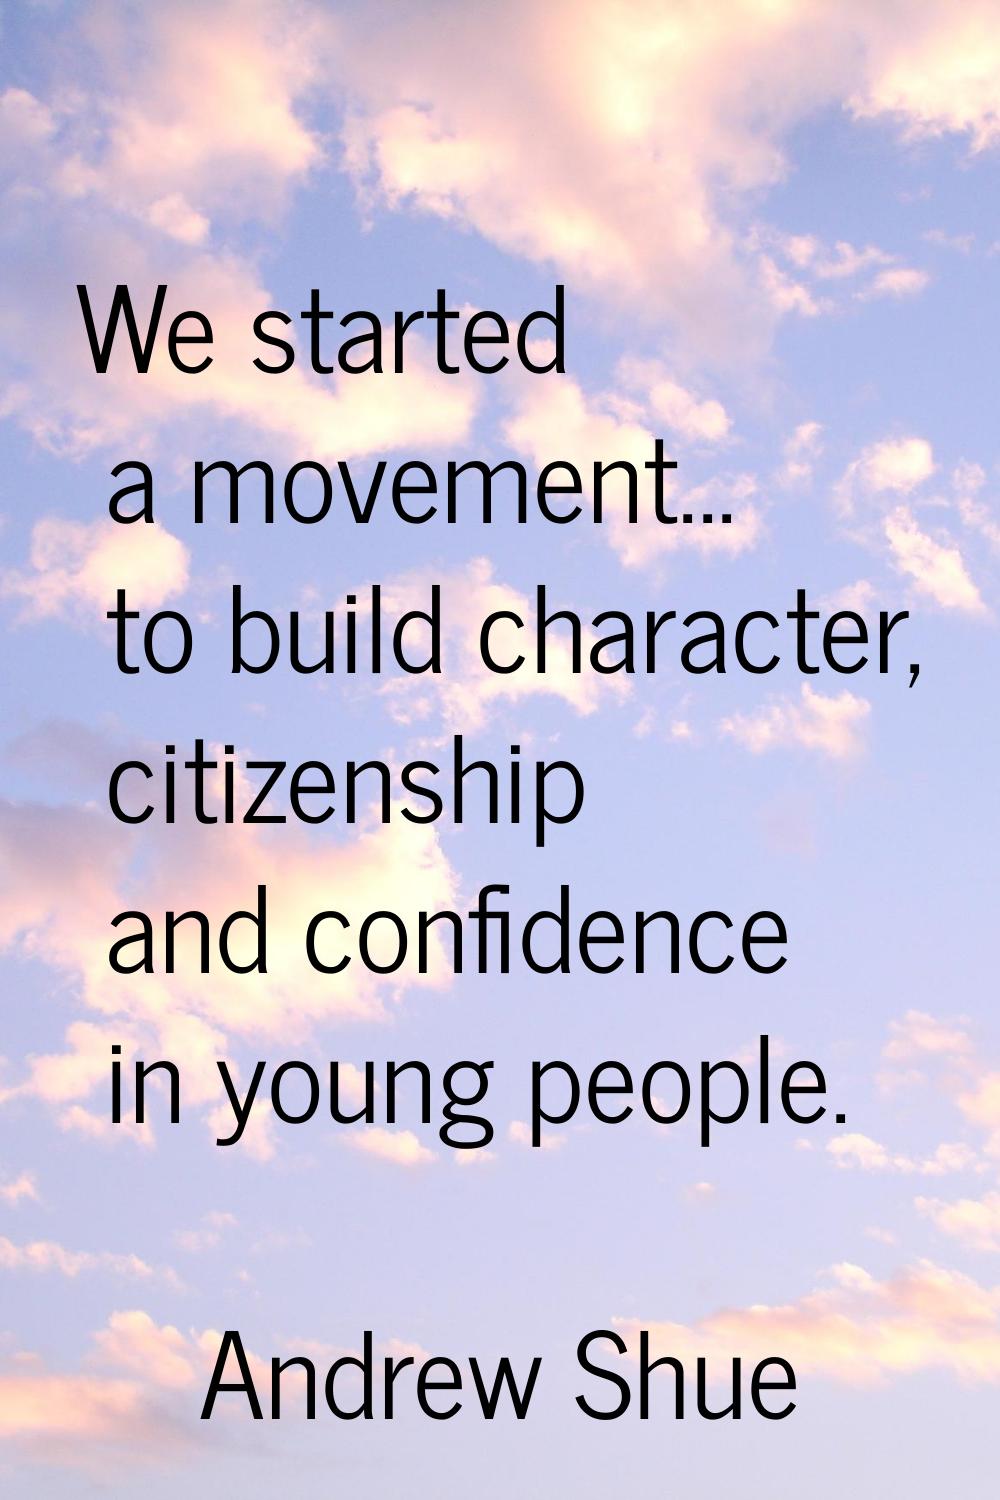 We started a movement... to build character, citizenship and confidence in young people.